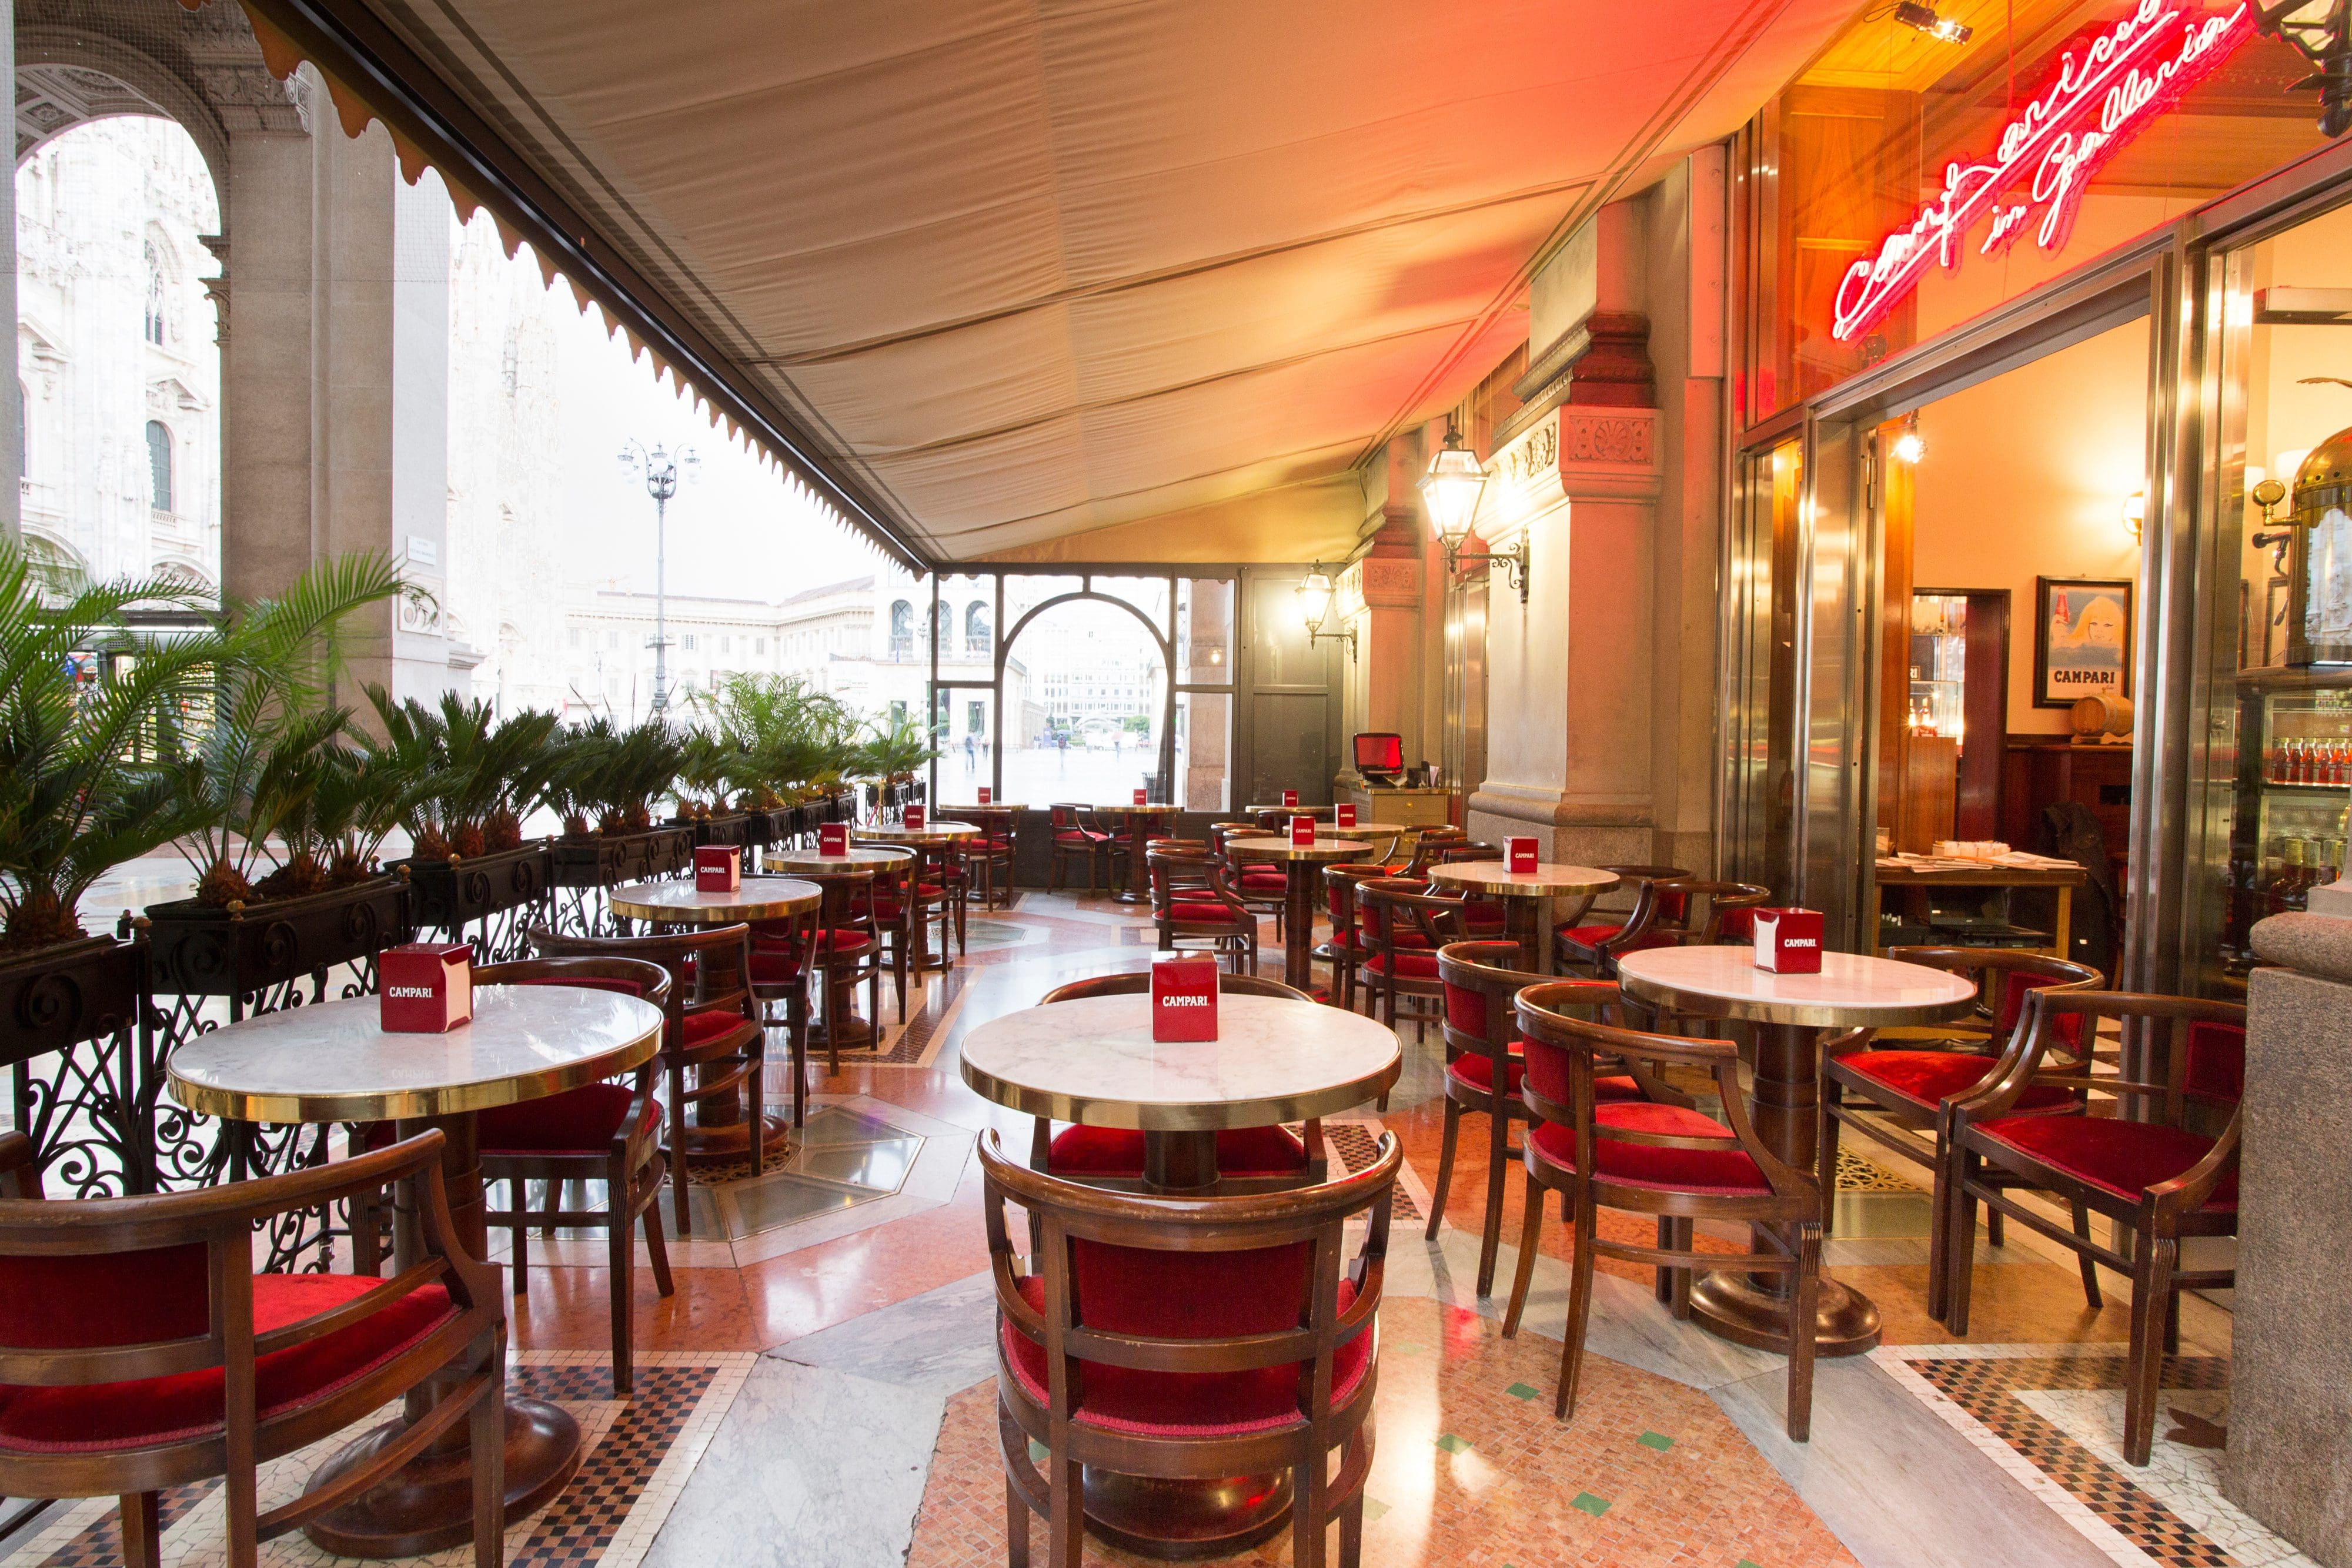 The outside terrace of Camparino in Galleria with its multi-coloured marble floor, vintage-style tables and chairs, and neon sign